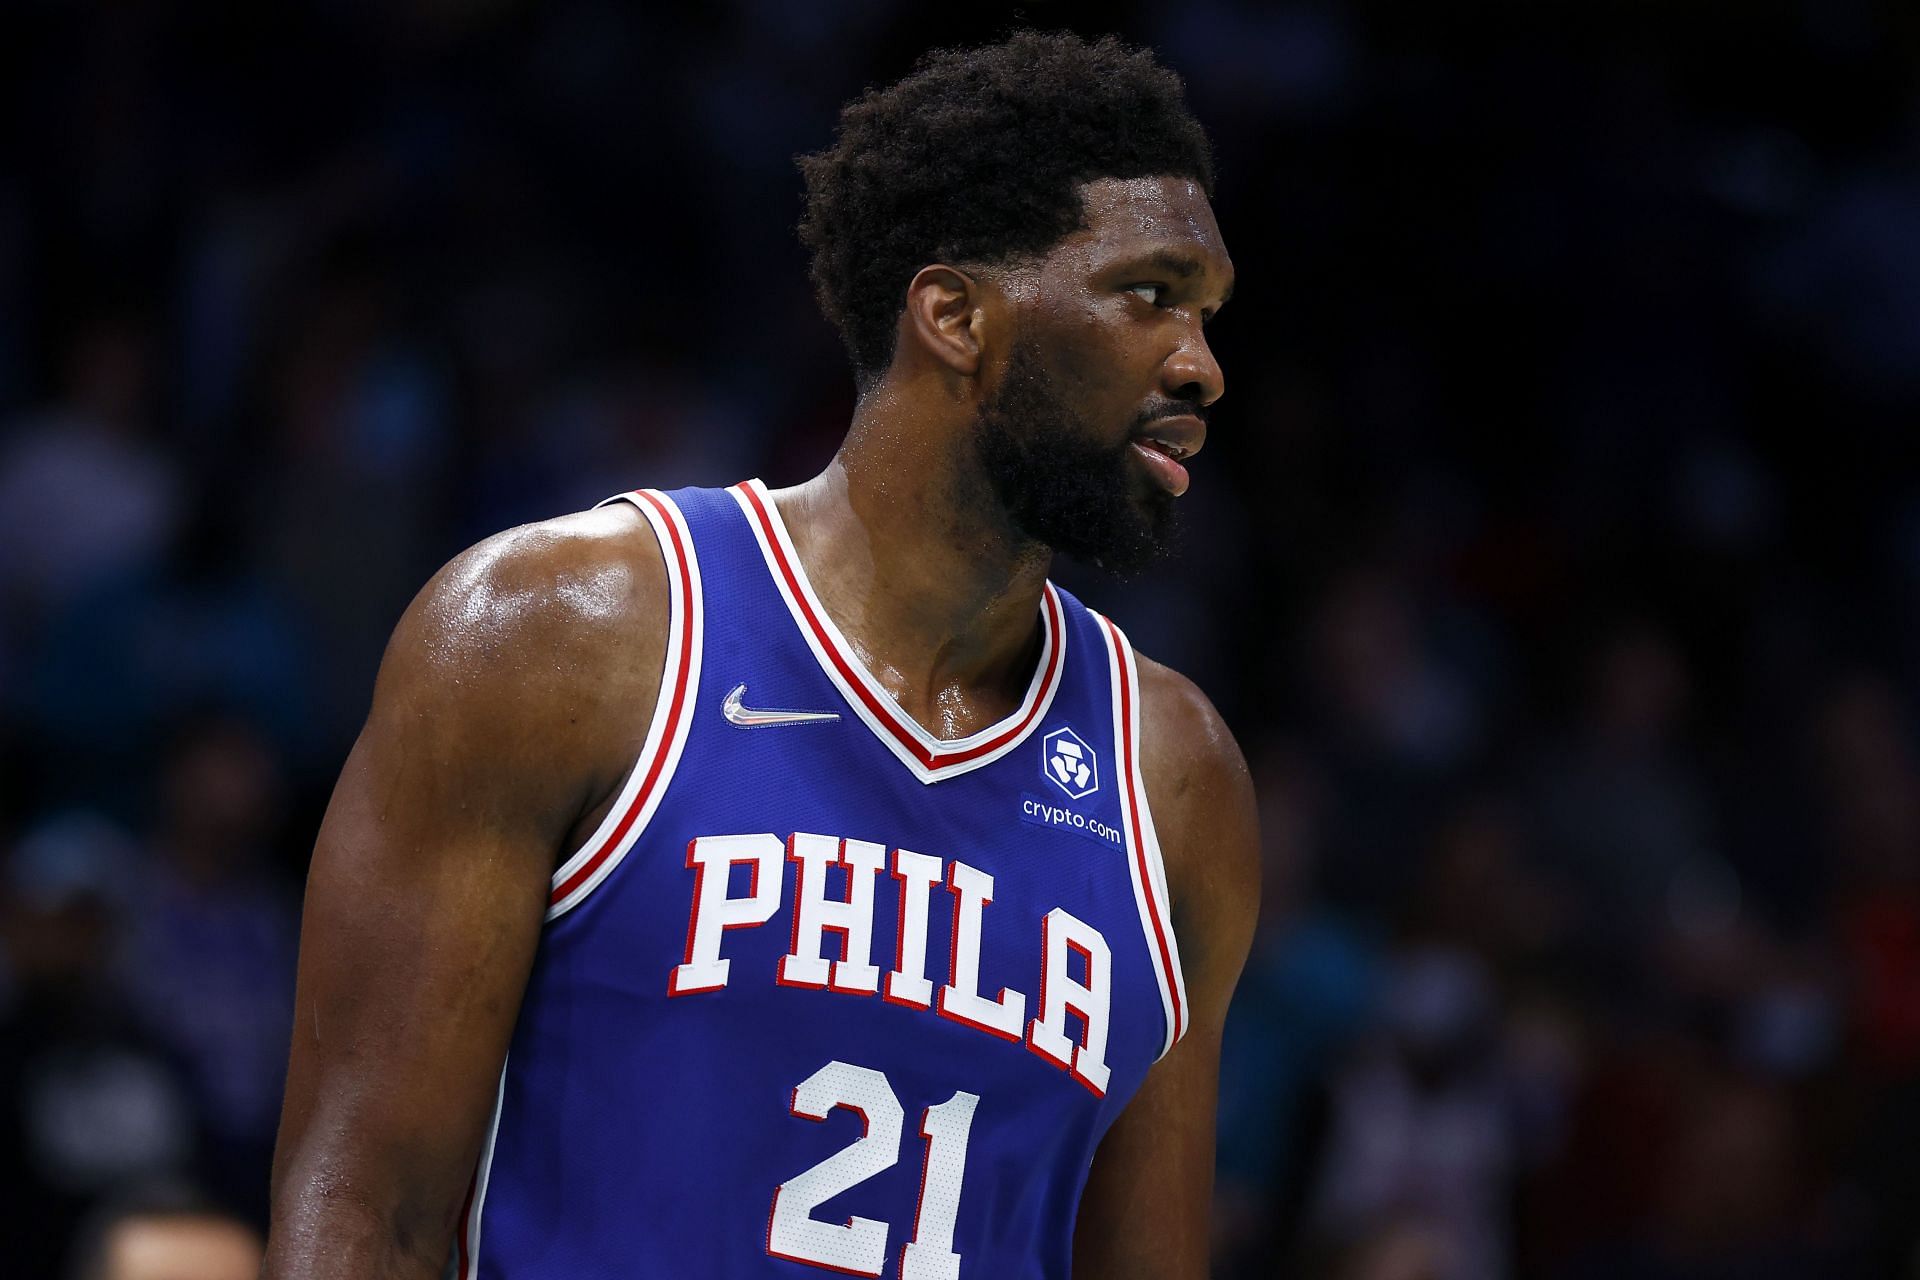 Philadelphia 76ers big man Joel Embiid is back on the Defensive Player of the Year power rankings